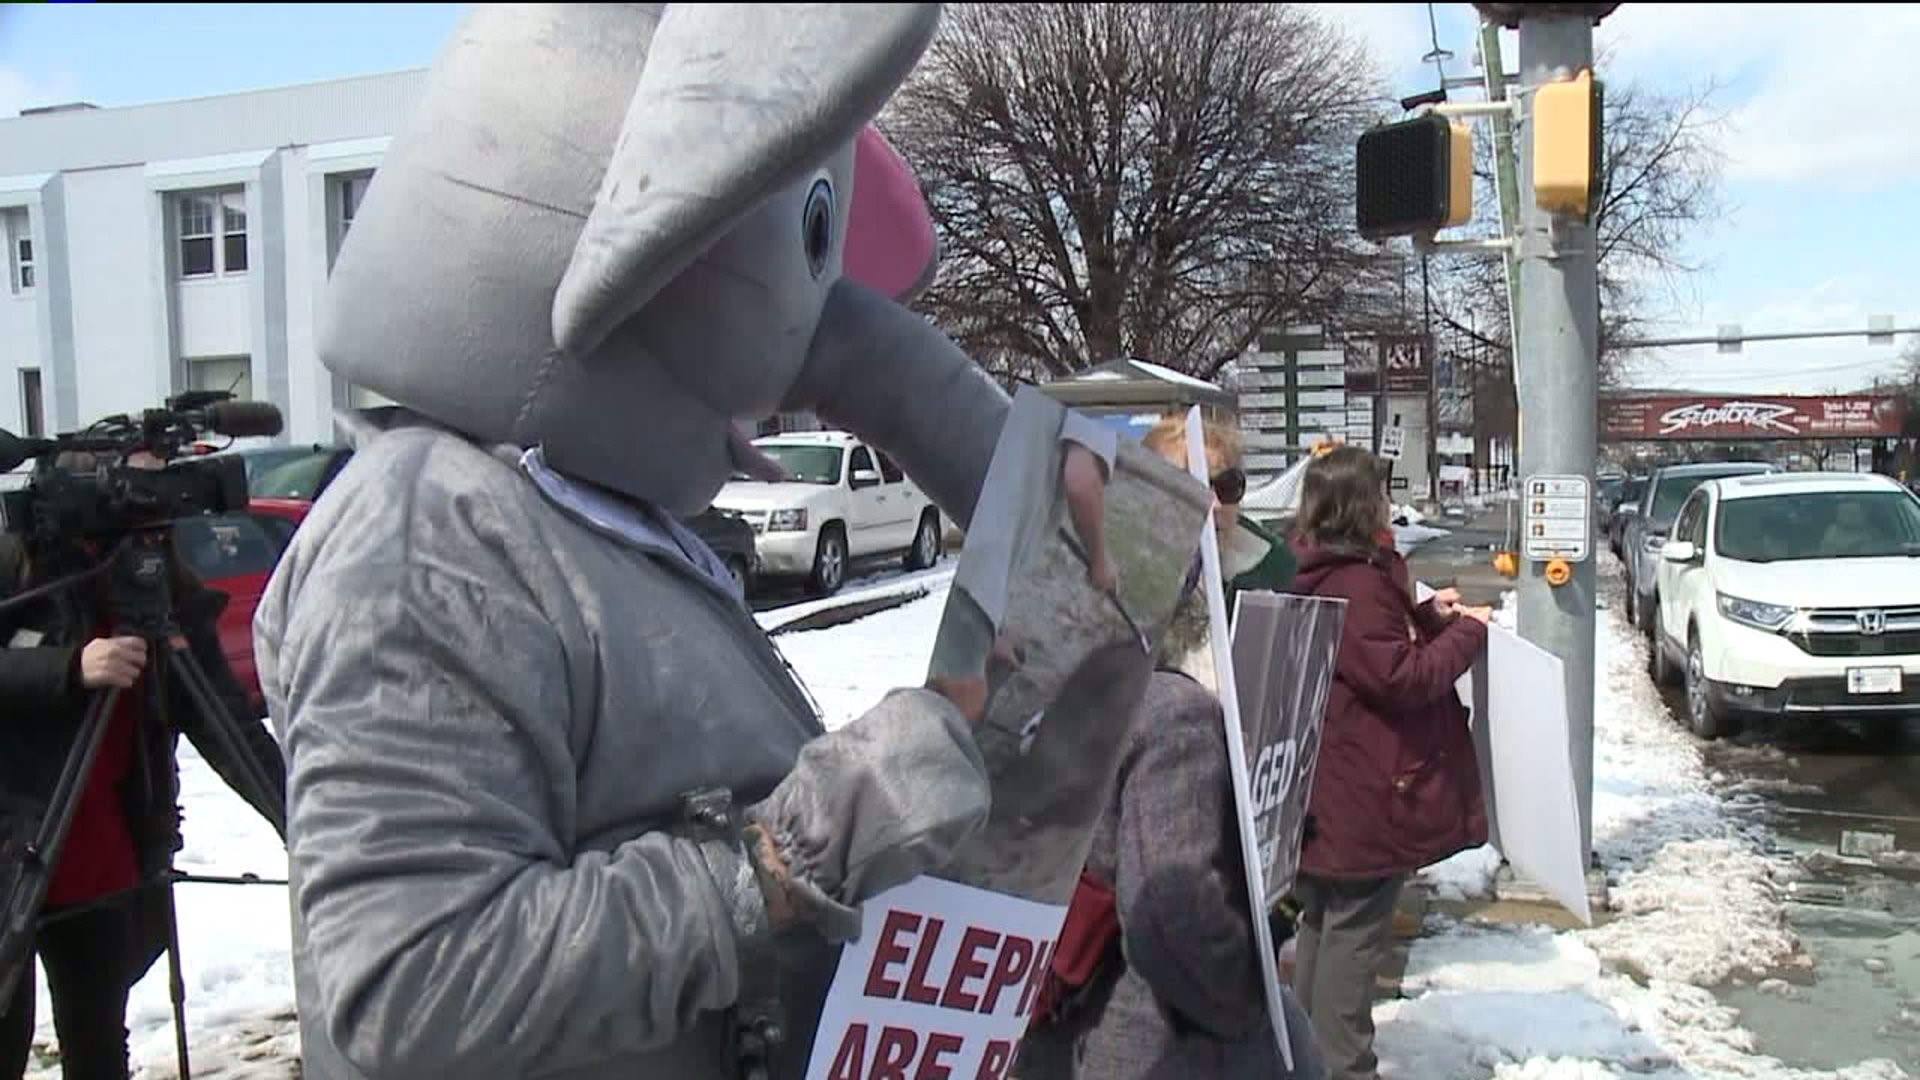 Protesters Greet Circus Spectators in Luzerne County